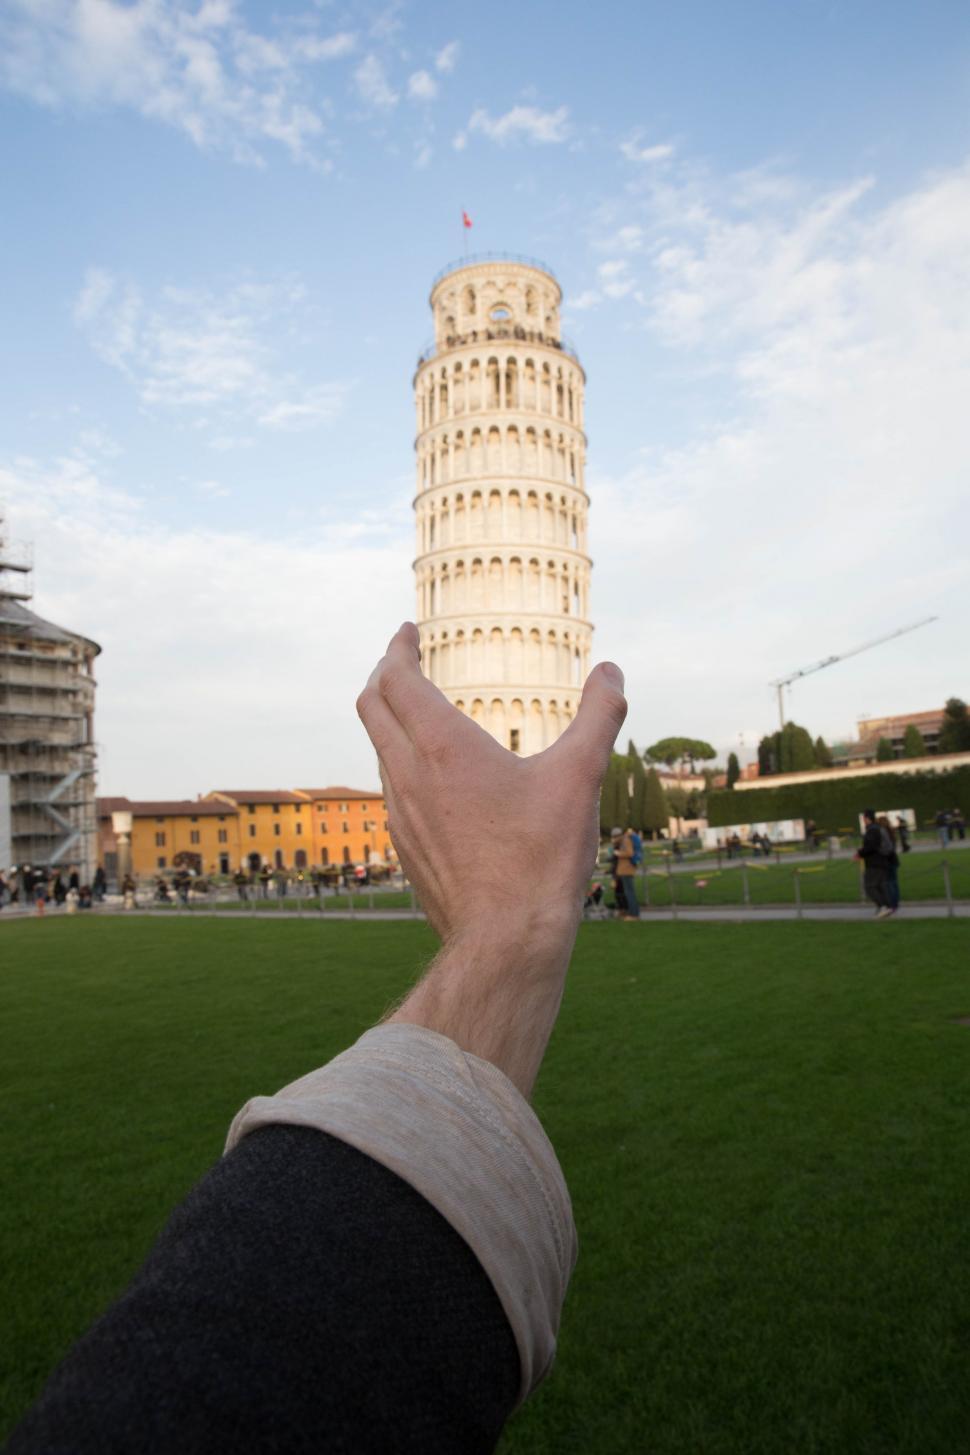 Free Image of Leaning tower of Pisa, Italy held by a hand 